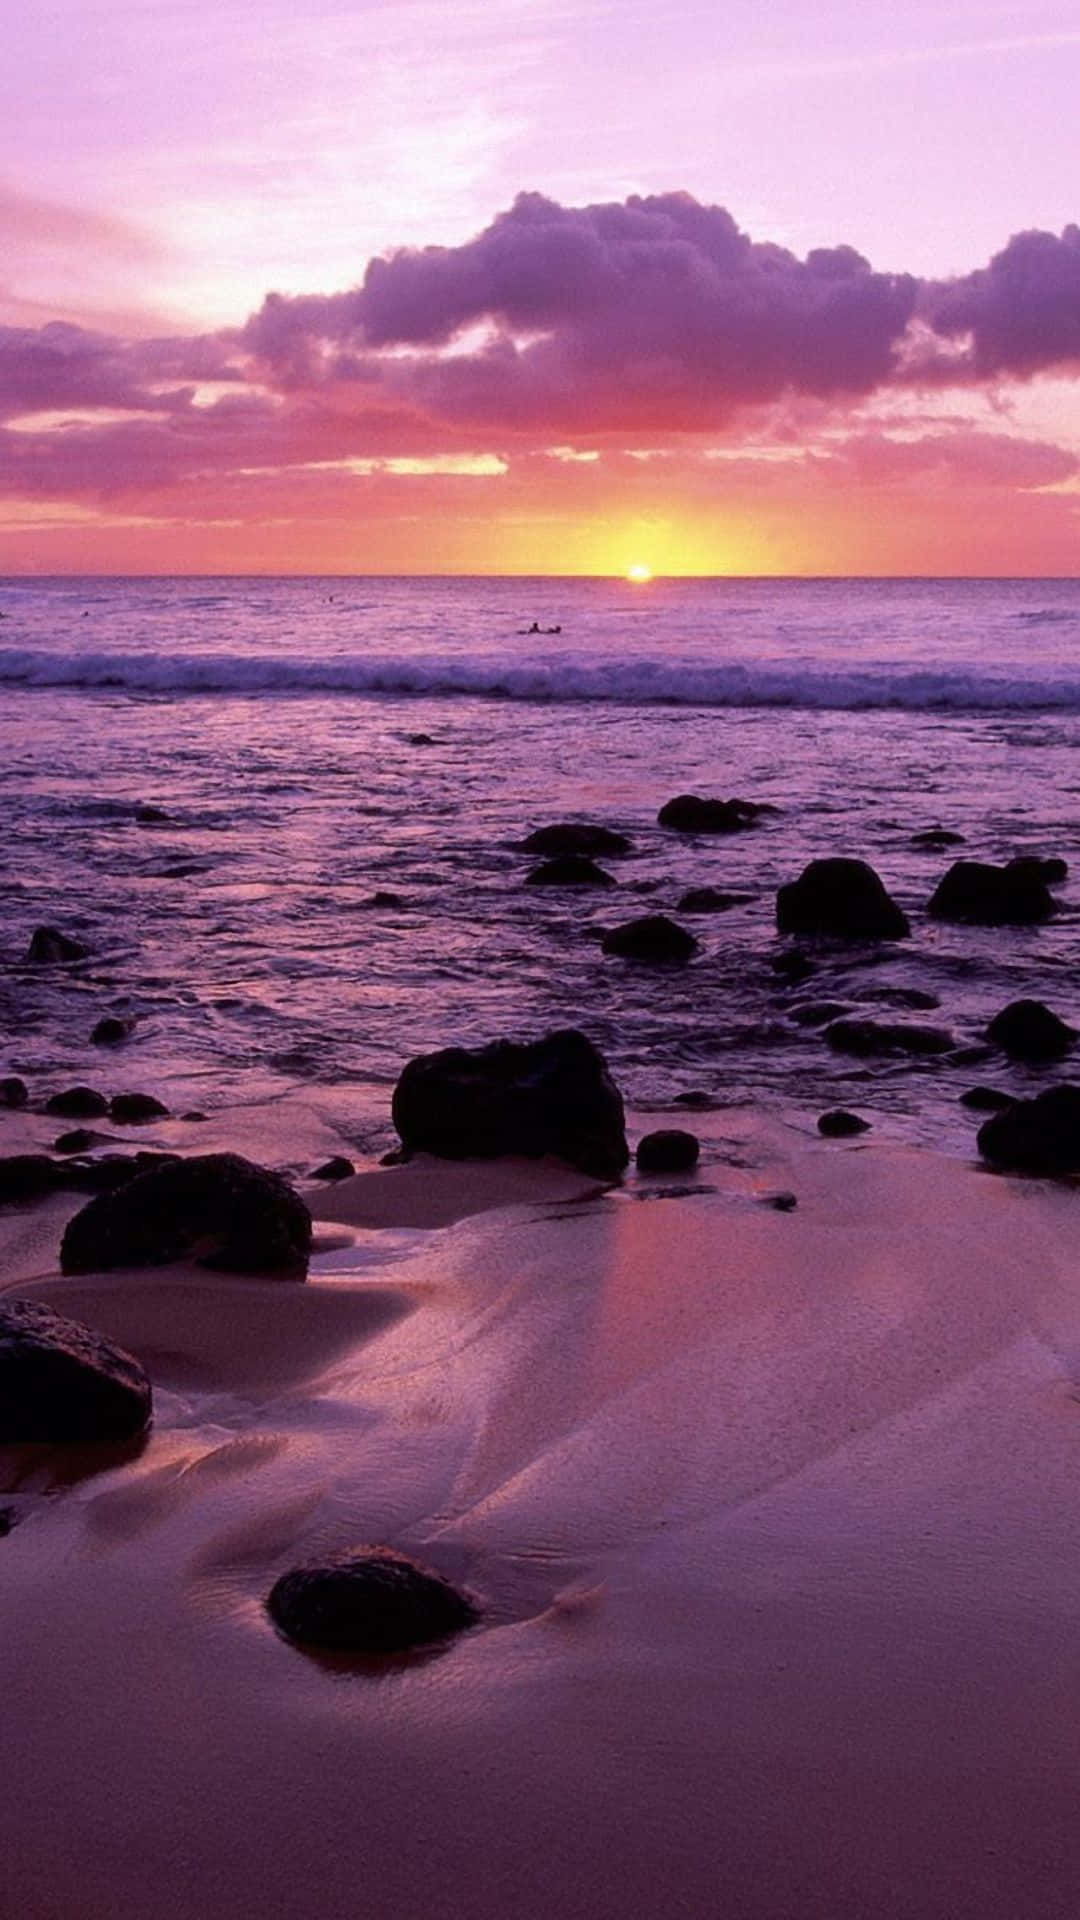 Enjoying a relaxing evening in Hawaii with your Iphone Wallpaper